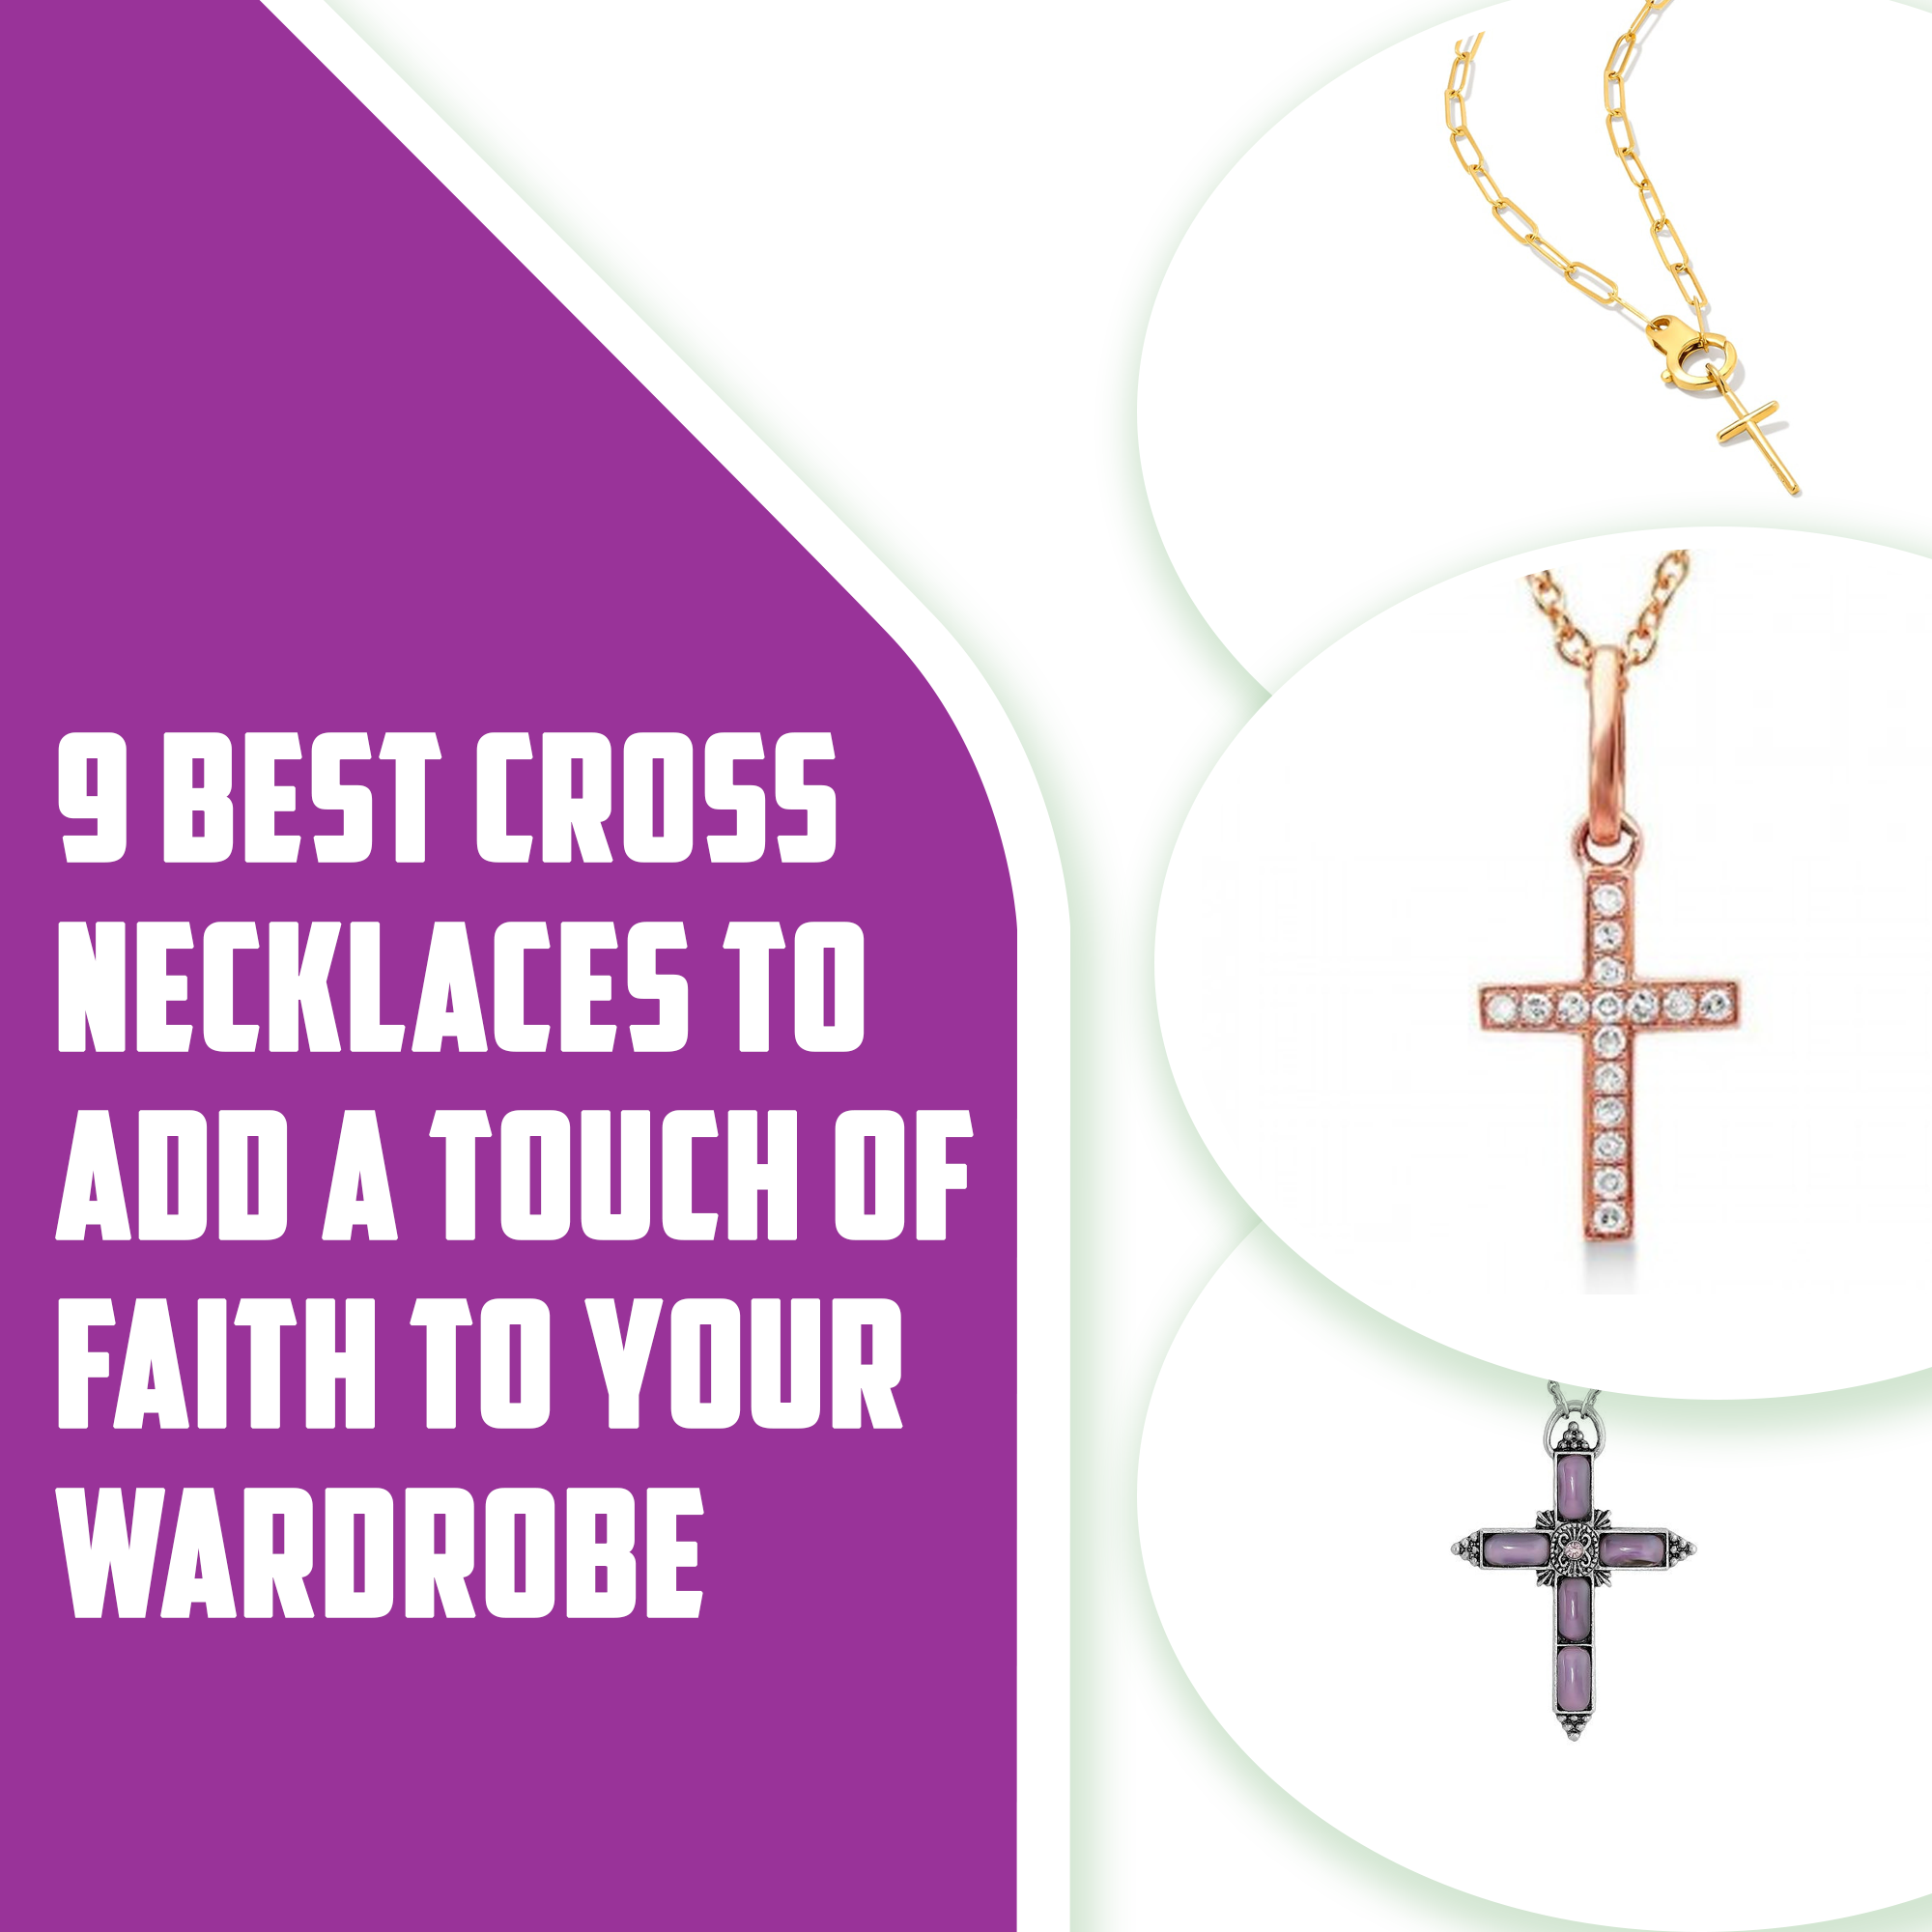 9 Best Cross Necklaces to Add a Touch of Faith to Your Wardrobe